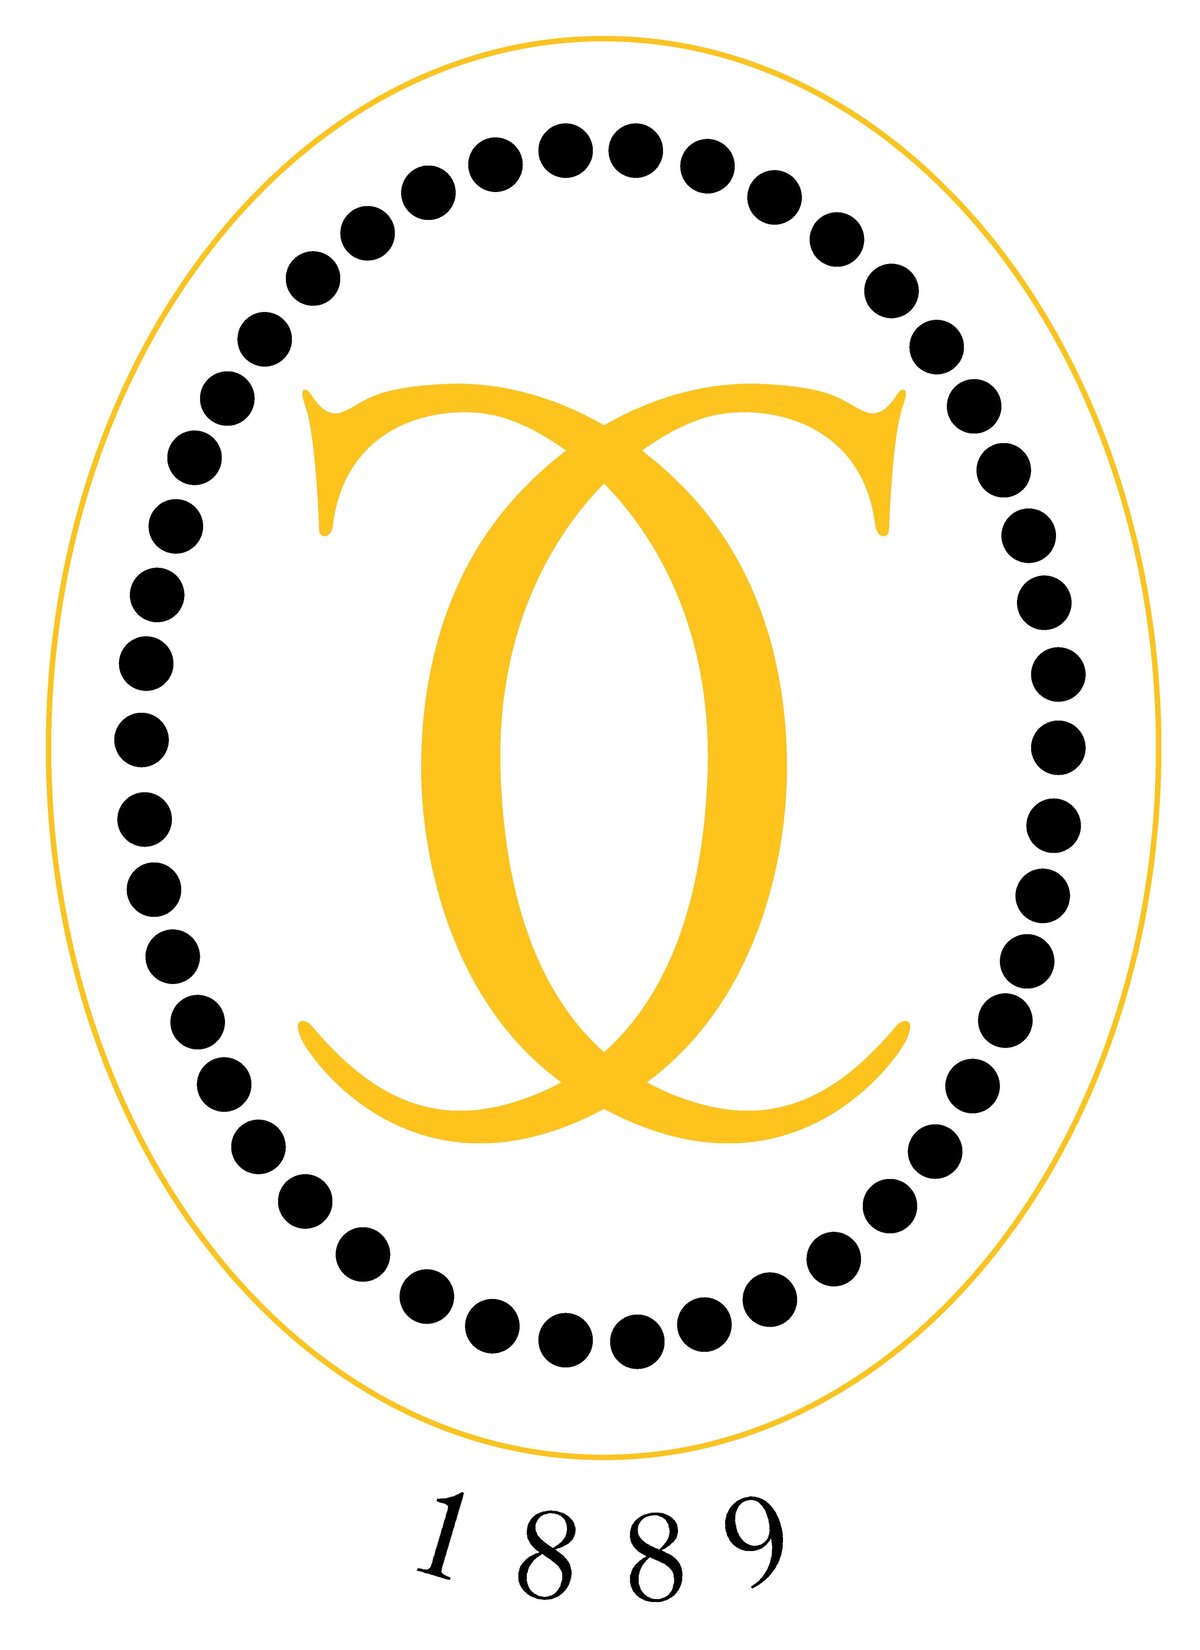 The Country Club logo